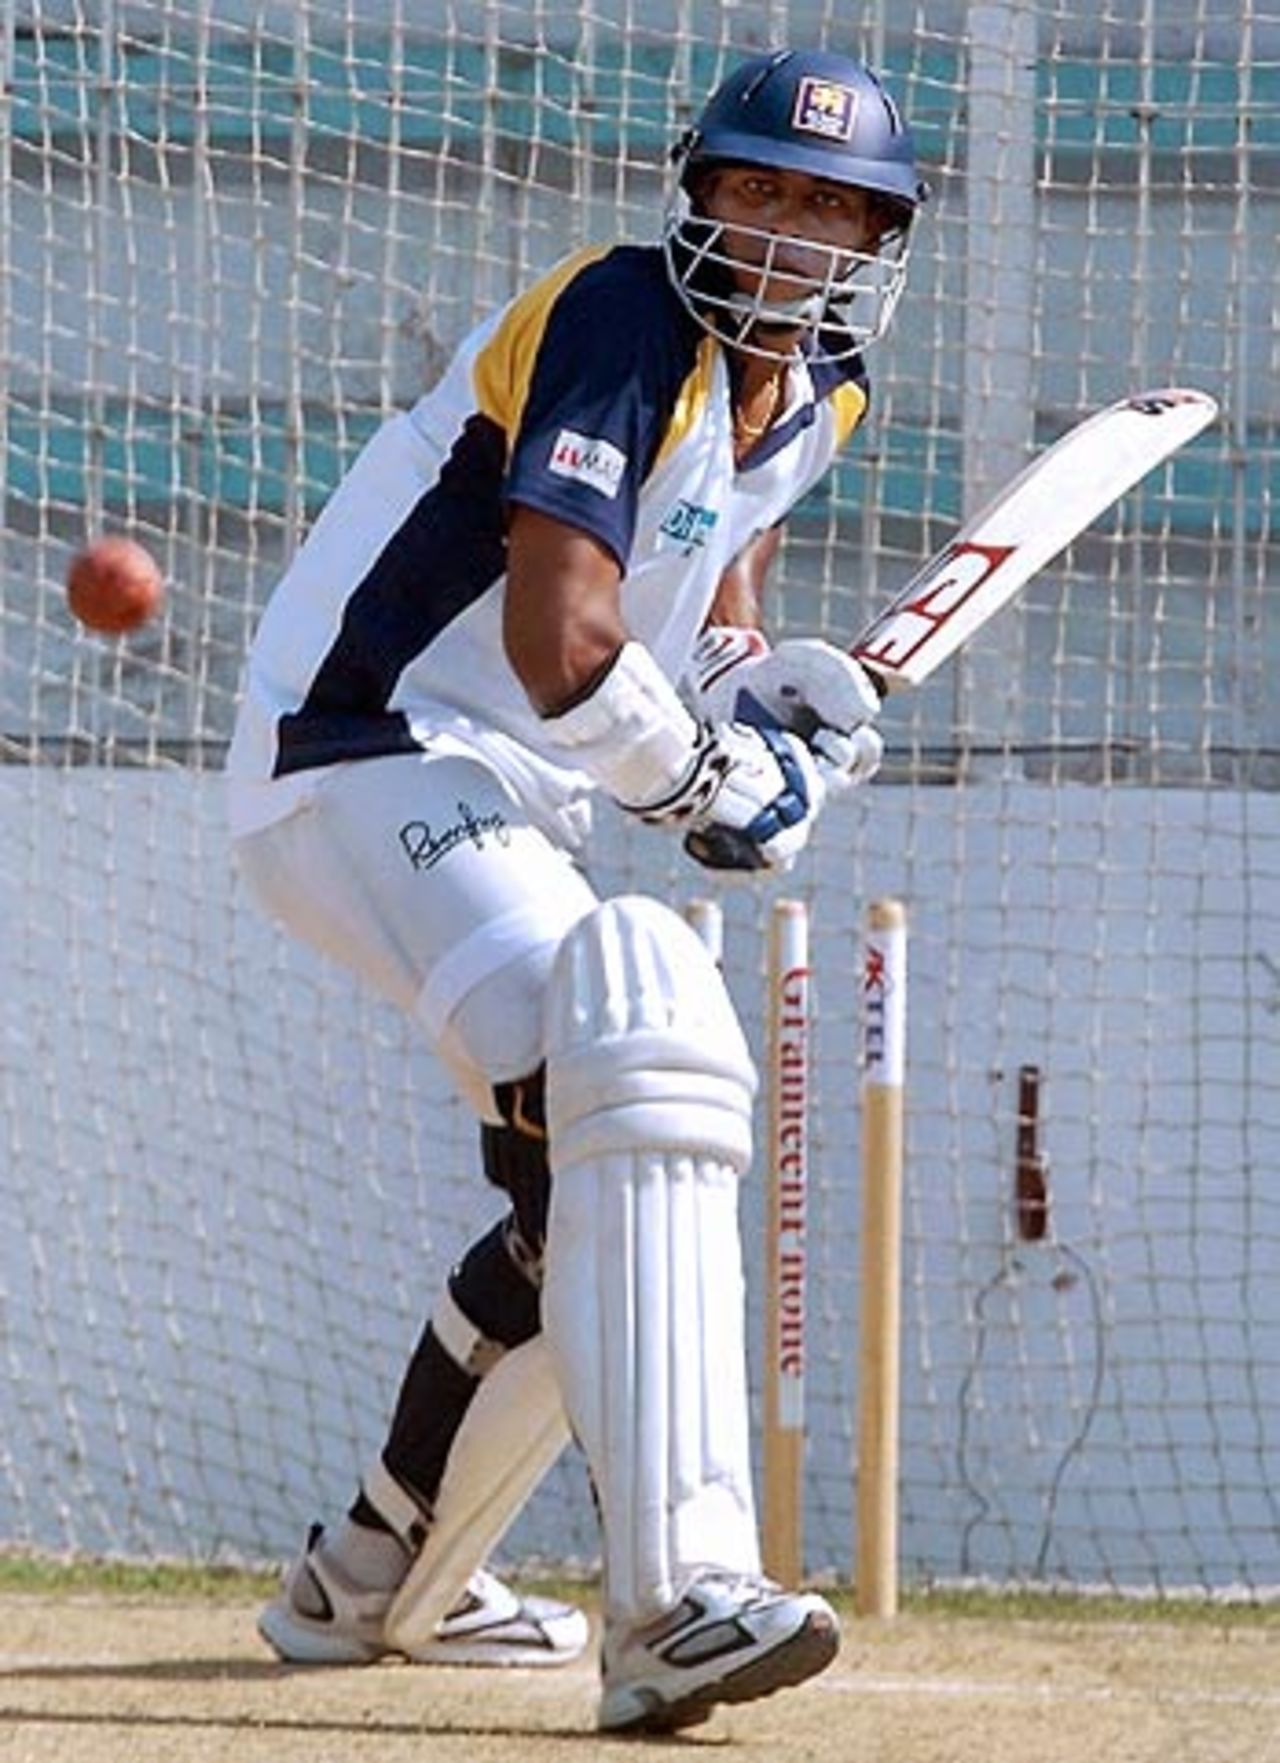 Michael Vandort bats in the nets during a training session before the second Test, Bogra, March 6 2006